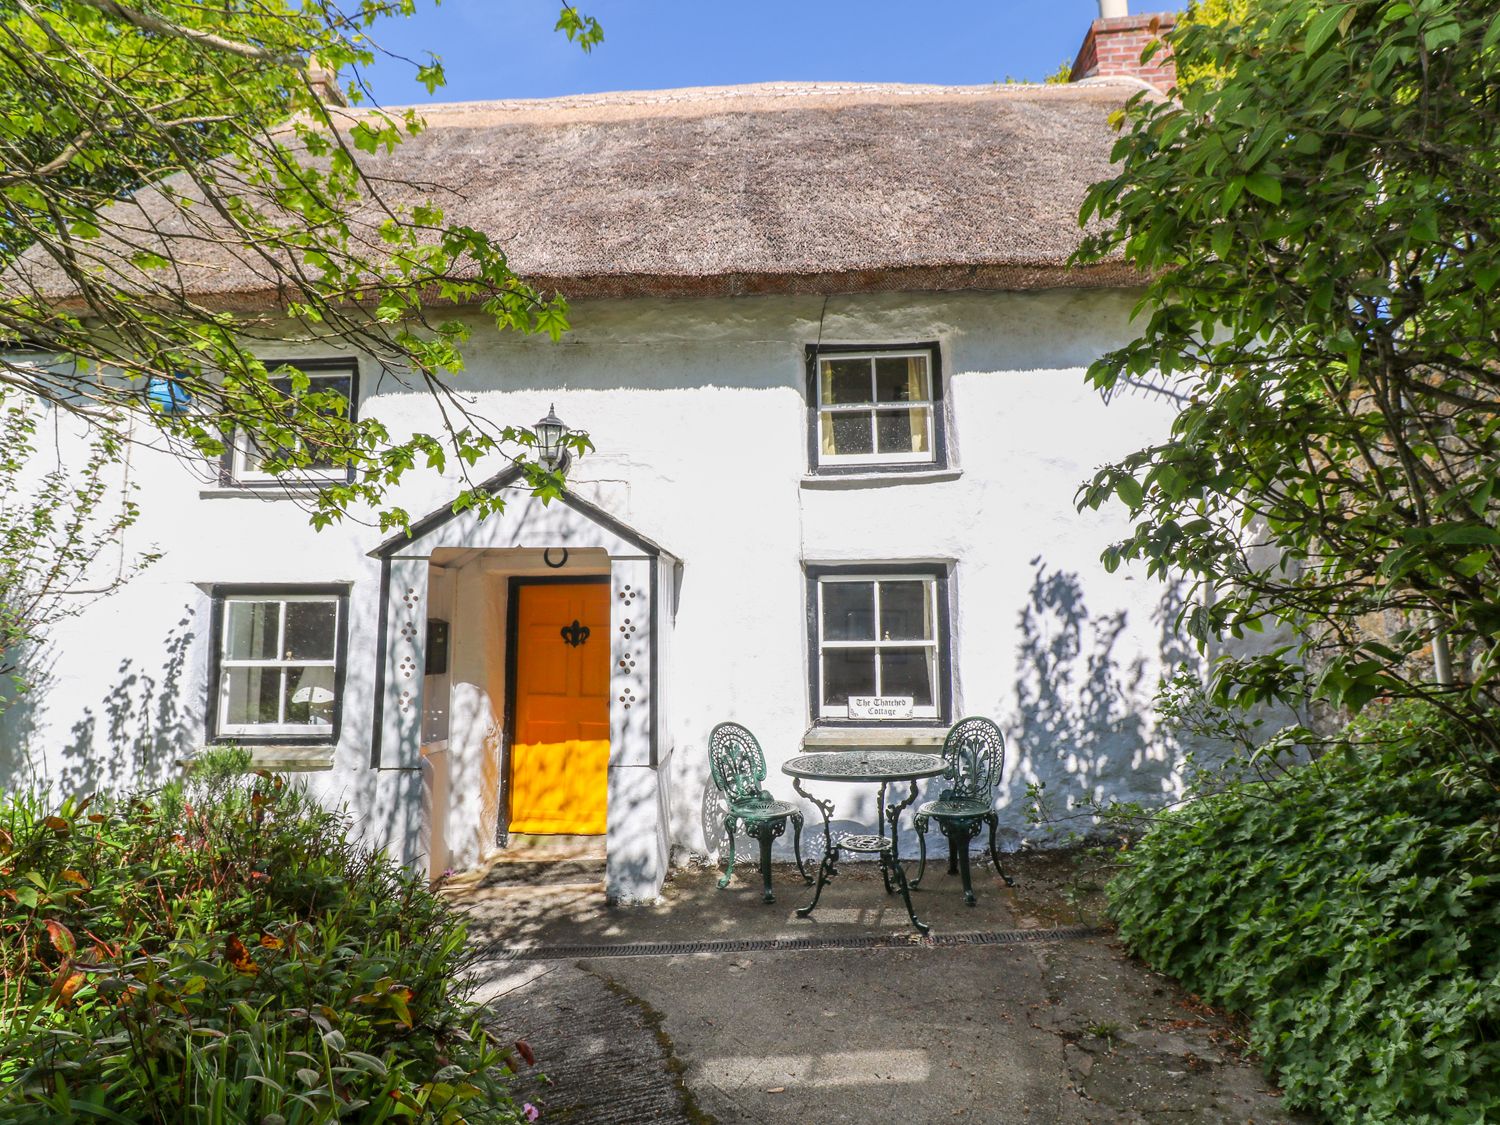 The Thatched Cottage - Cornwall - 1010677 - photo 1